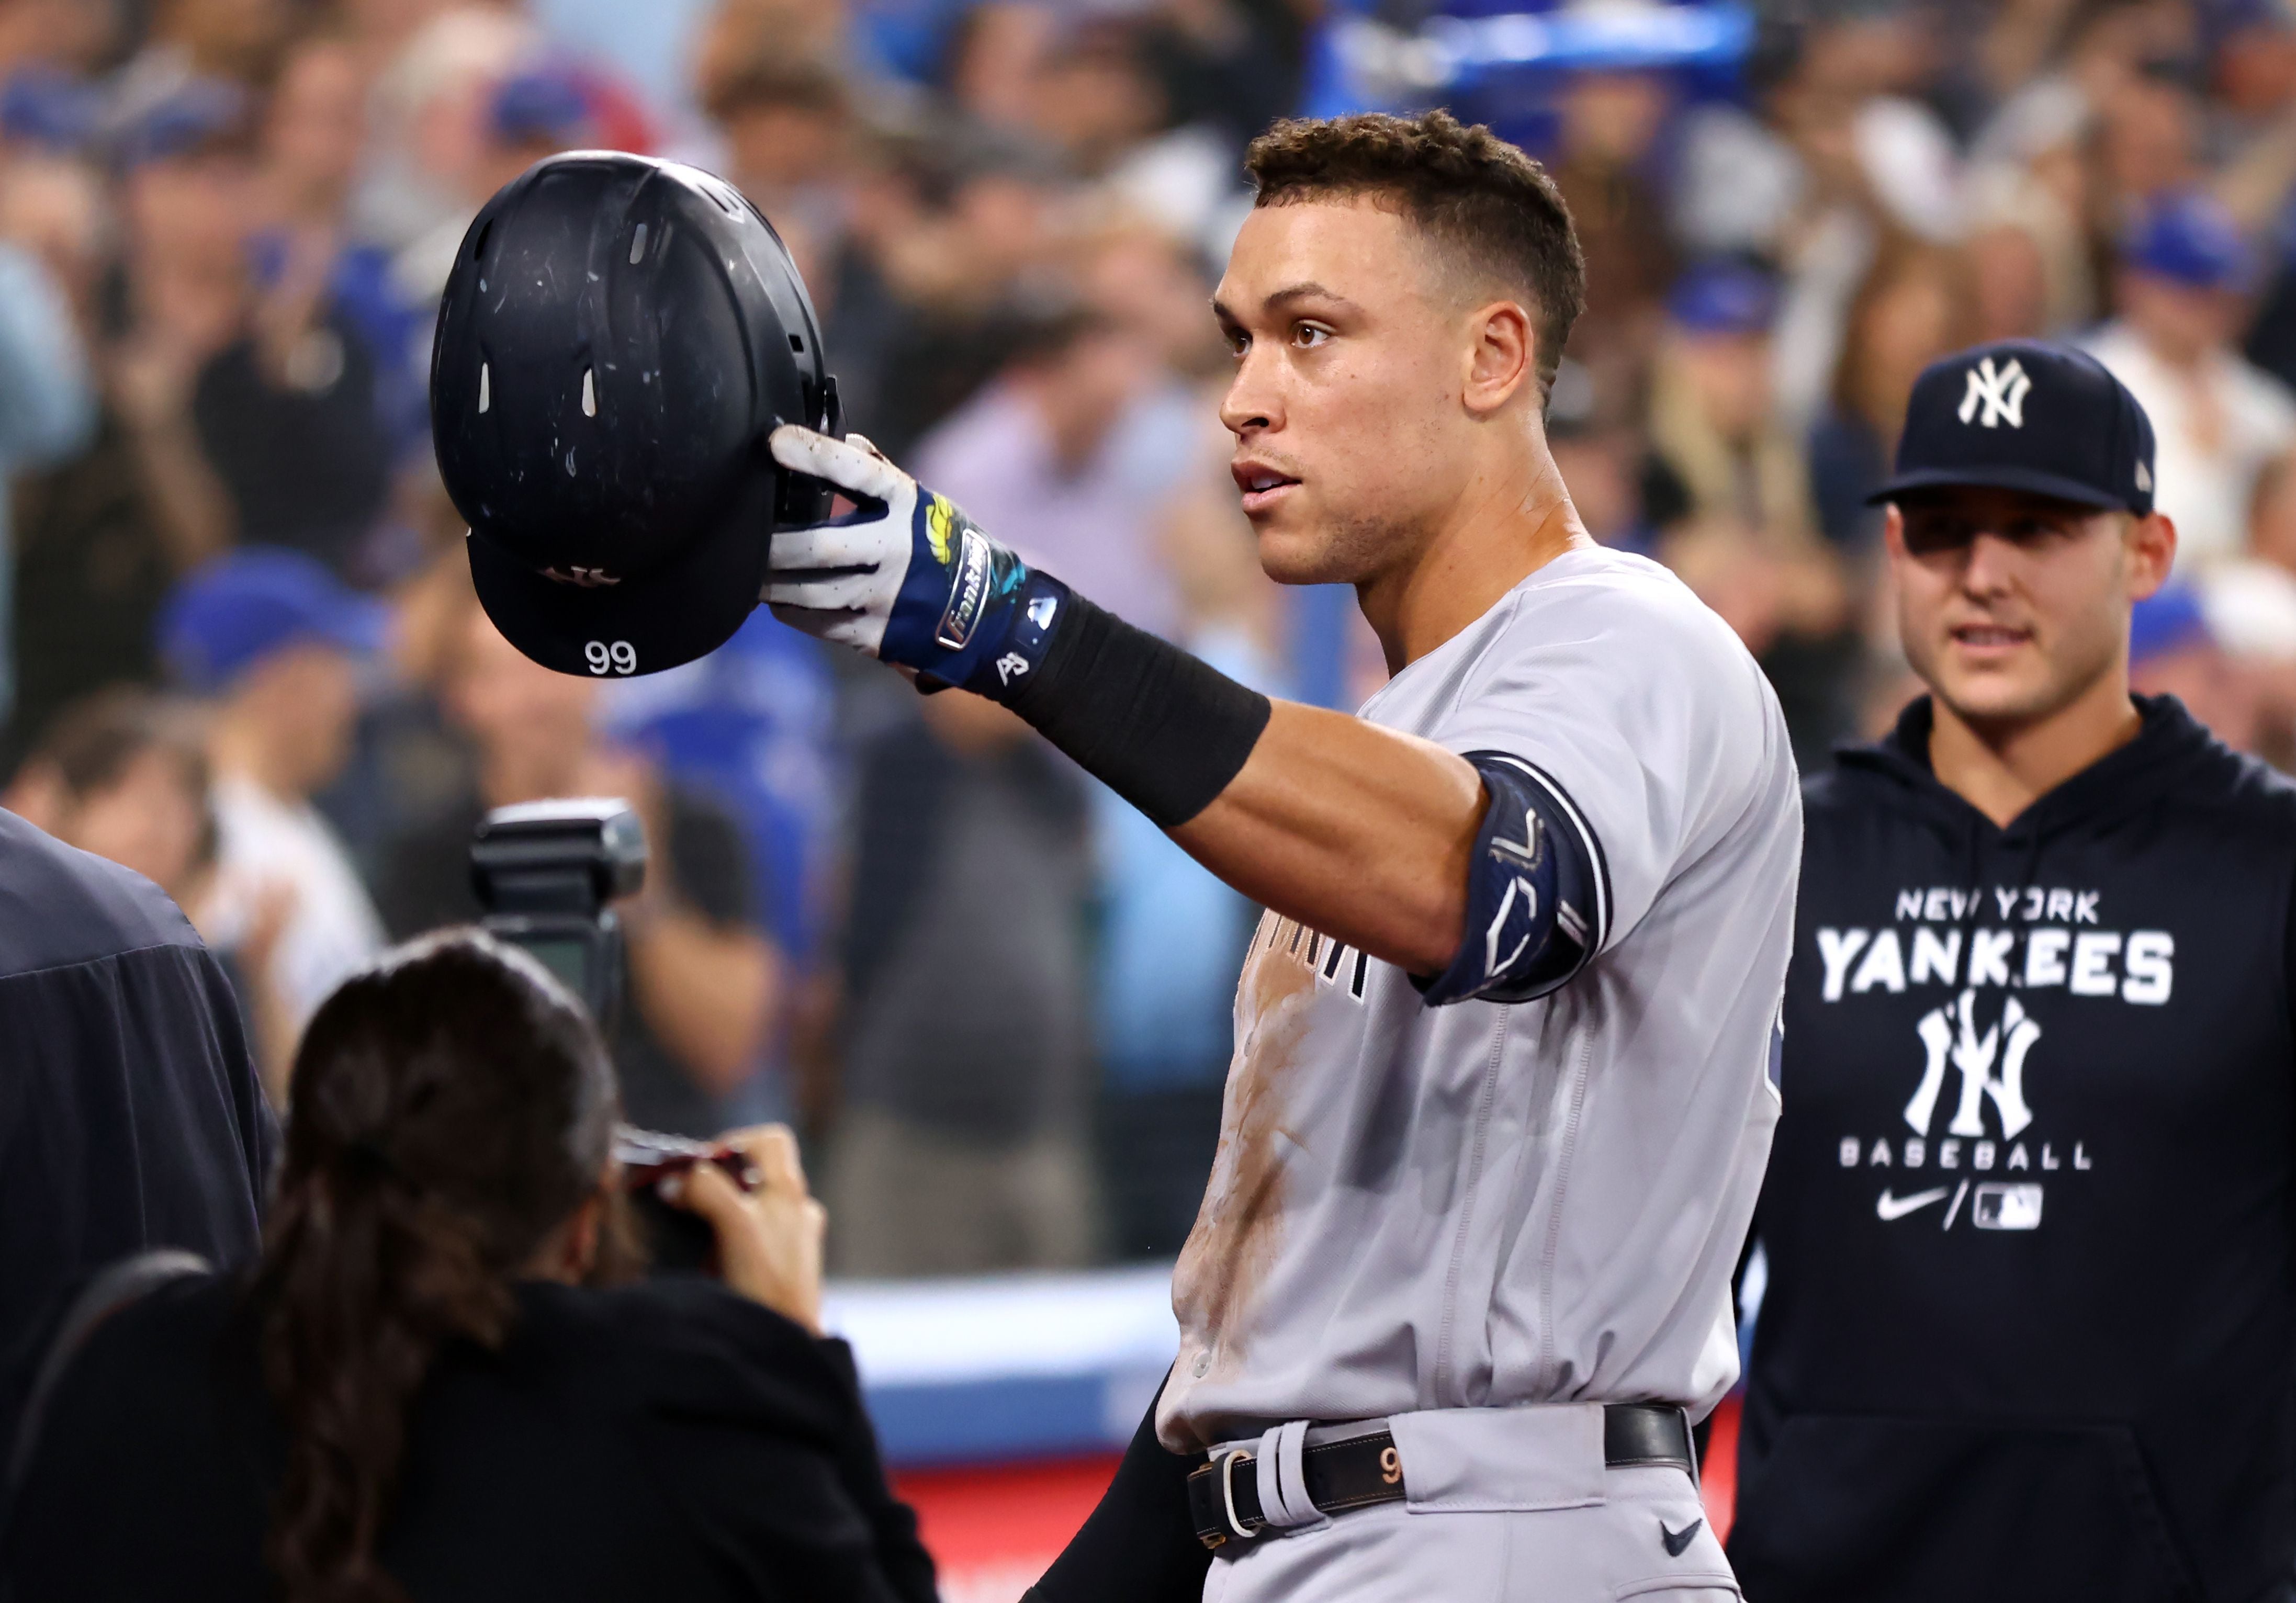 As Aaron Judge chases home run record, fans chase bleacher seats